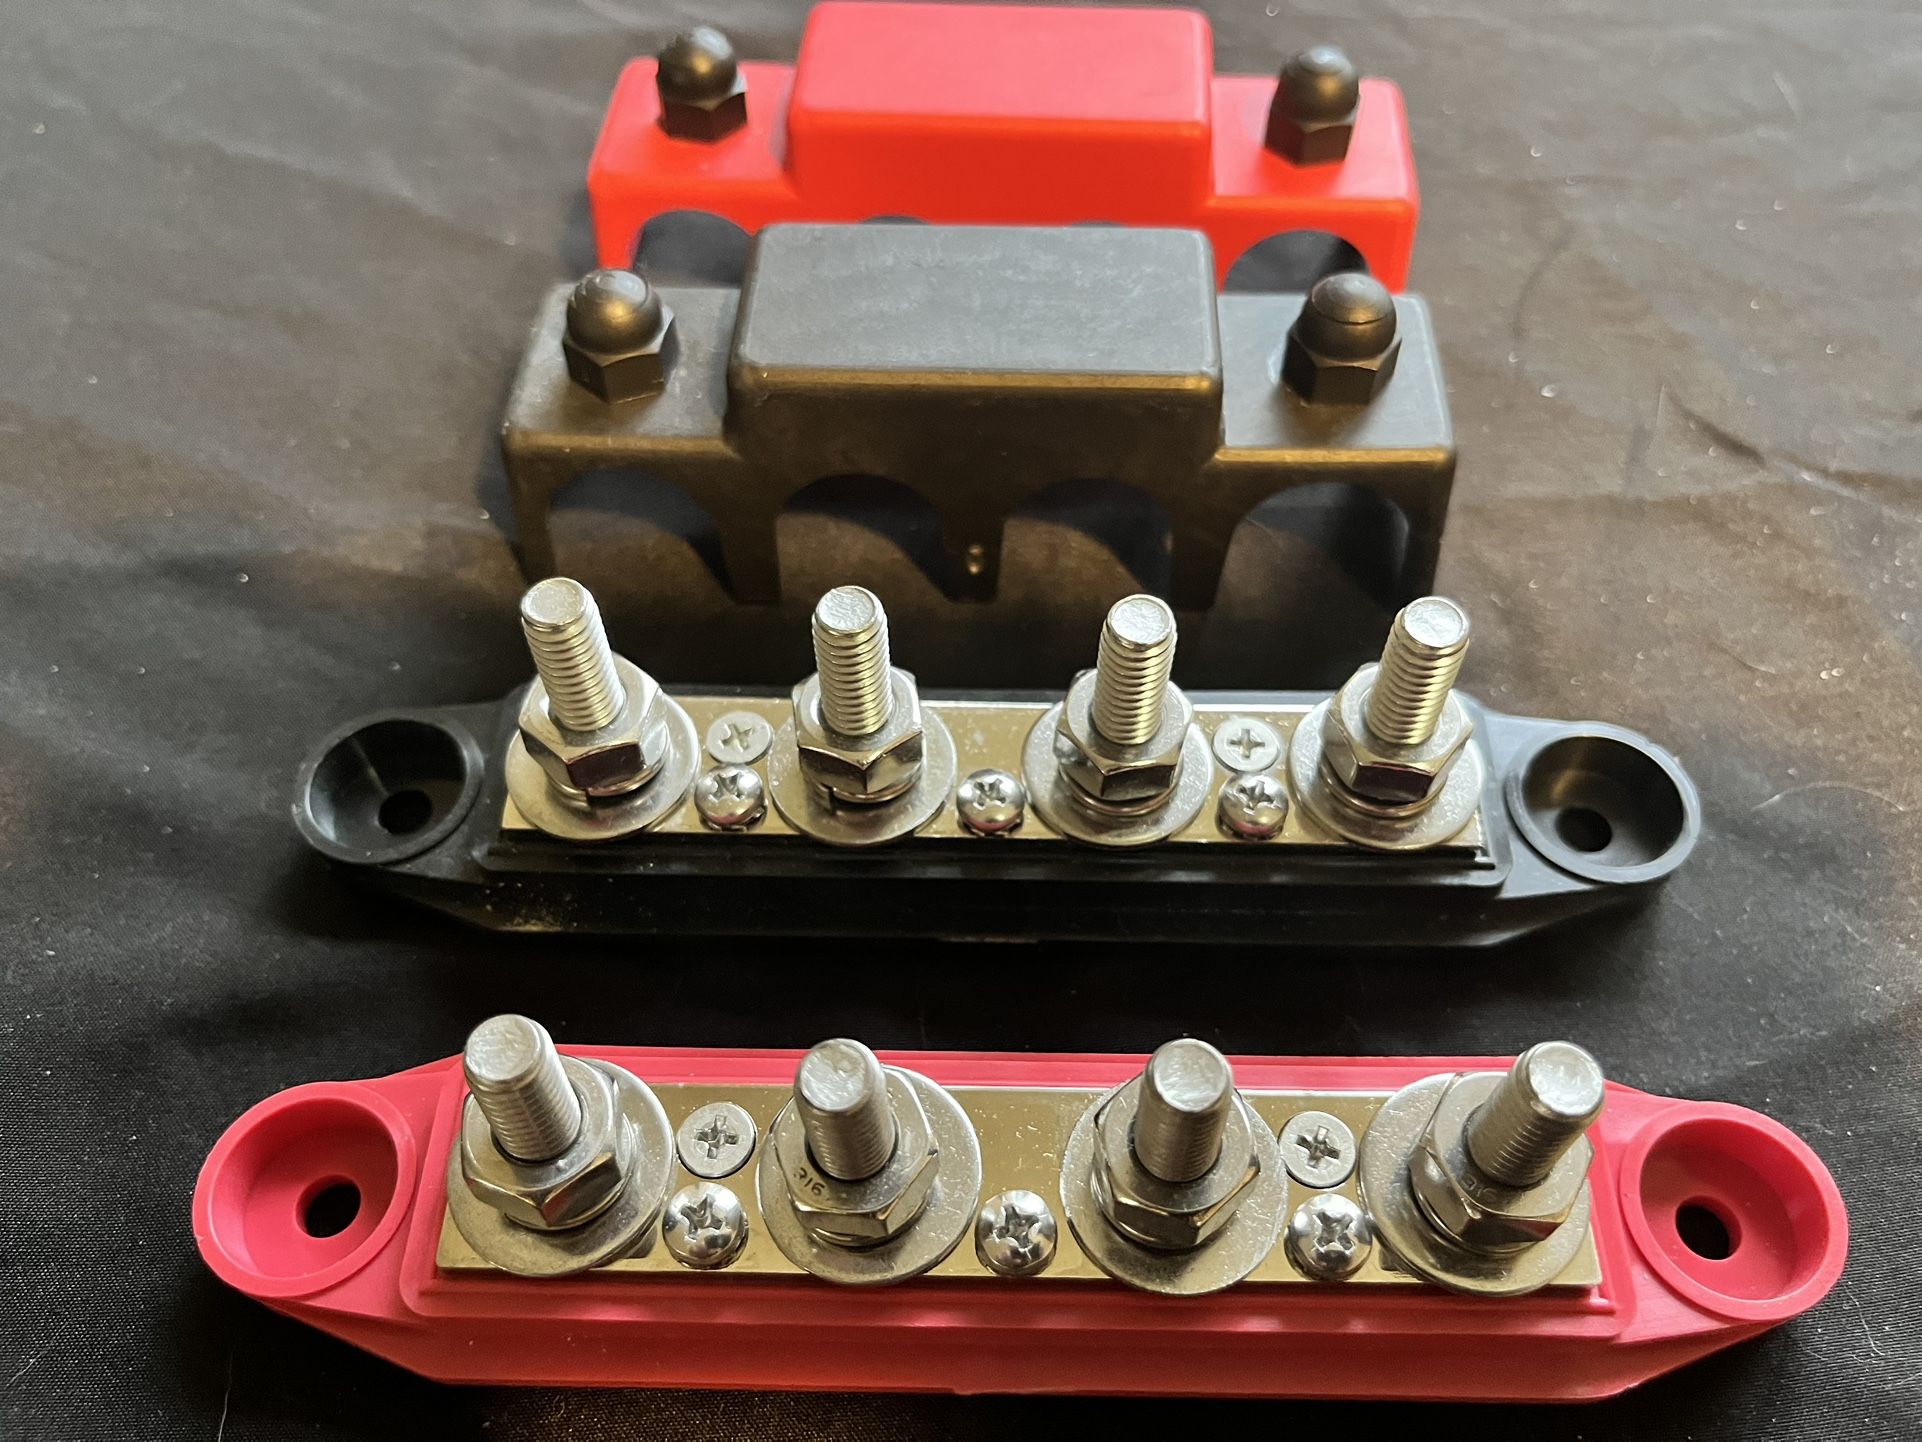 Busbar - Made in USA – 4-Post 250 Amp Stainless Steel Distribution Block - Pair Red & Black 5/16"